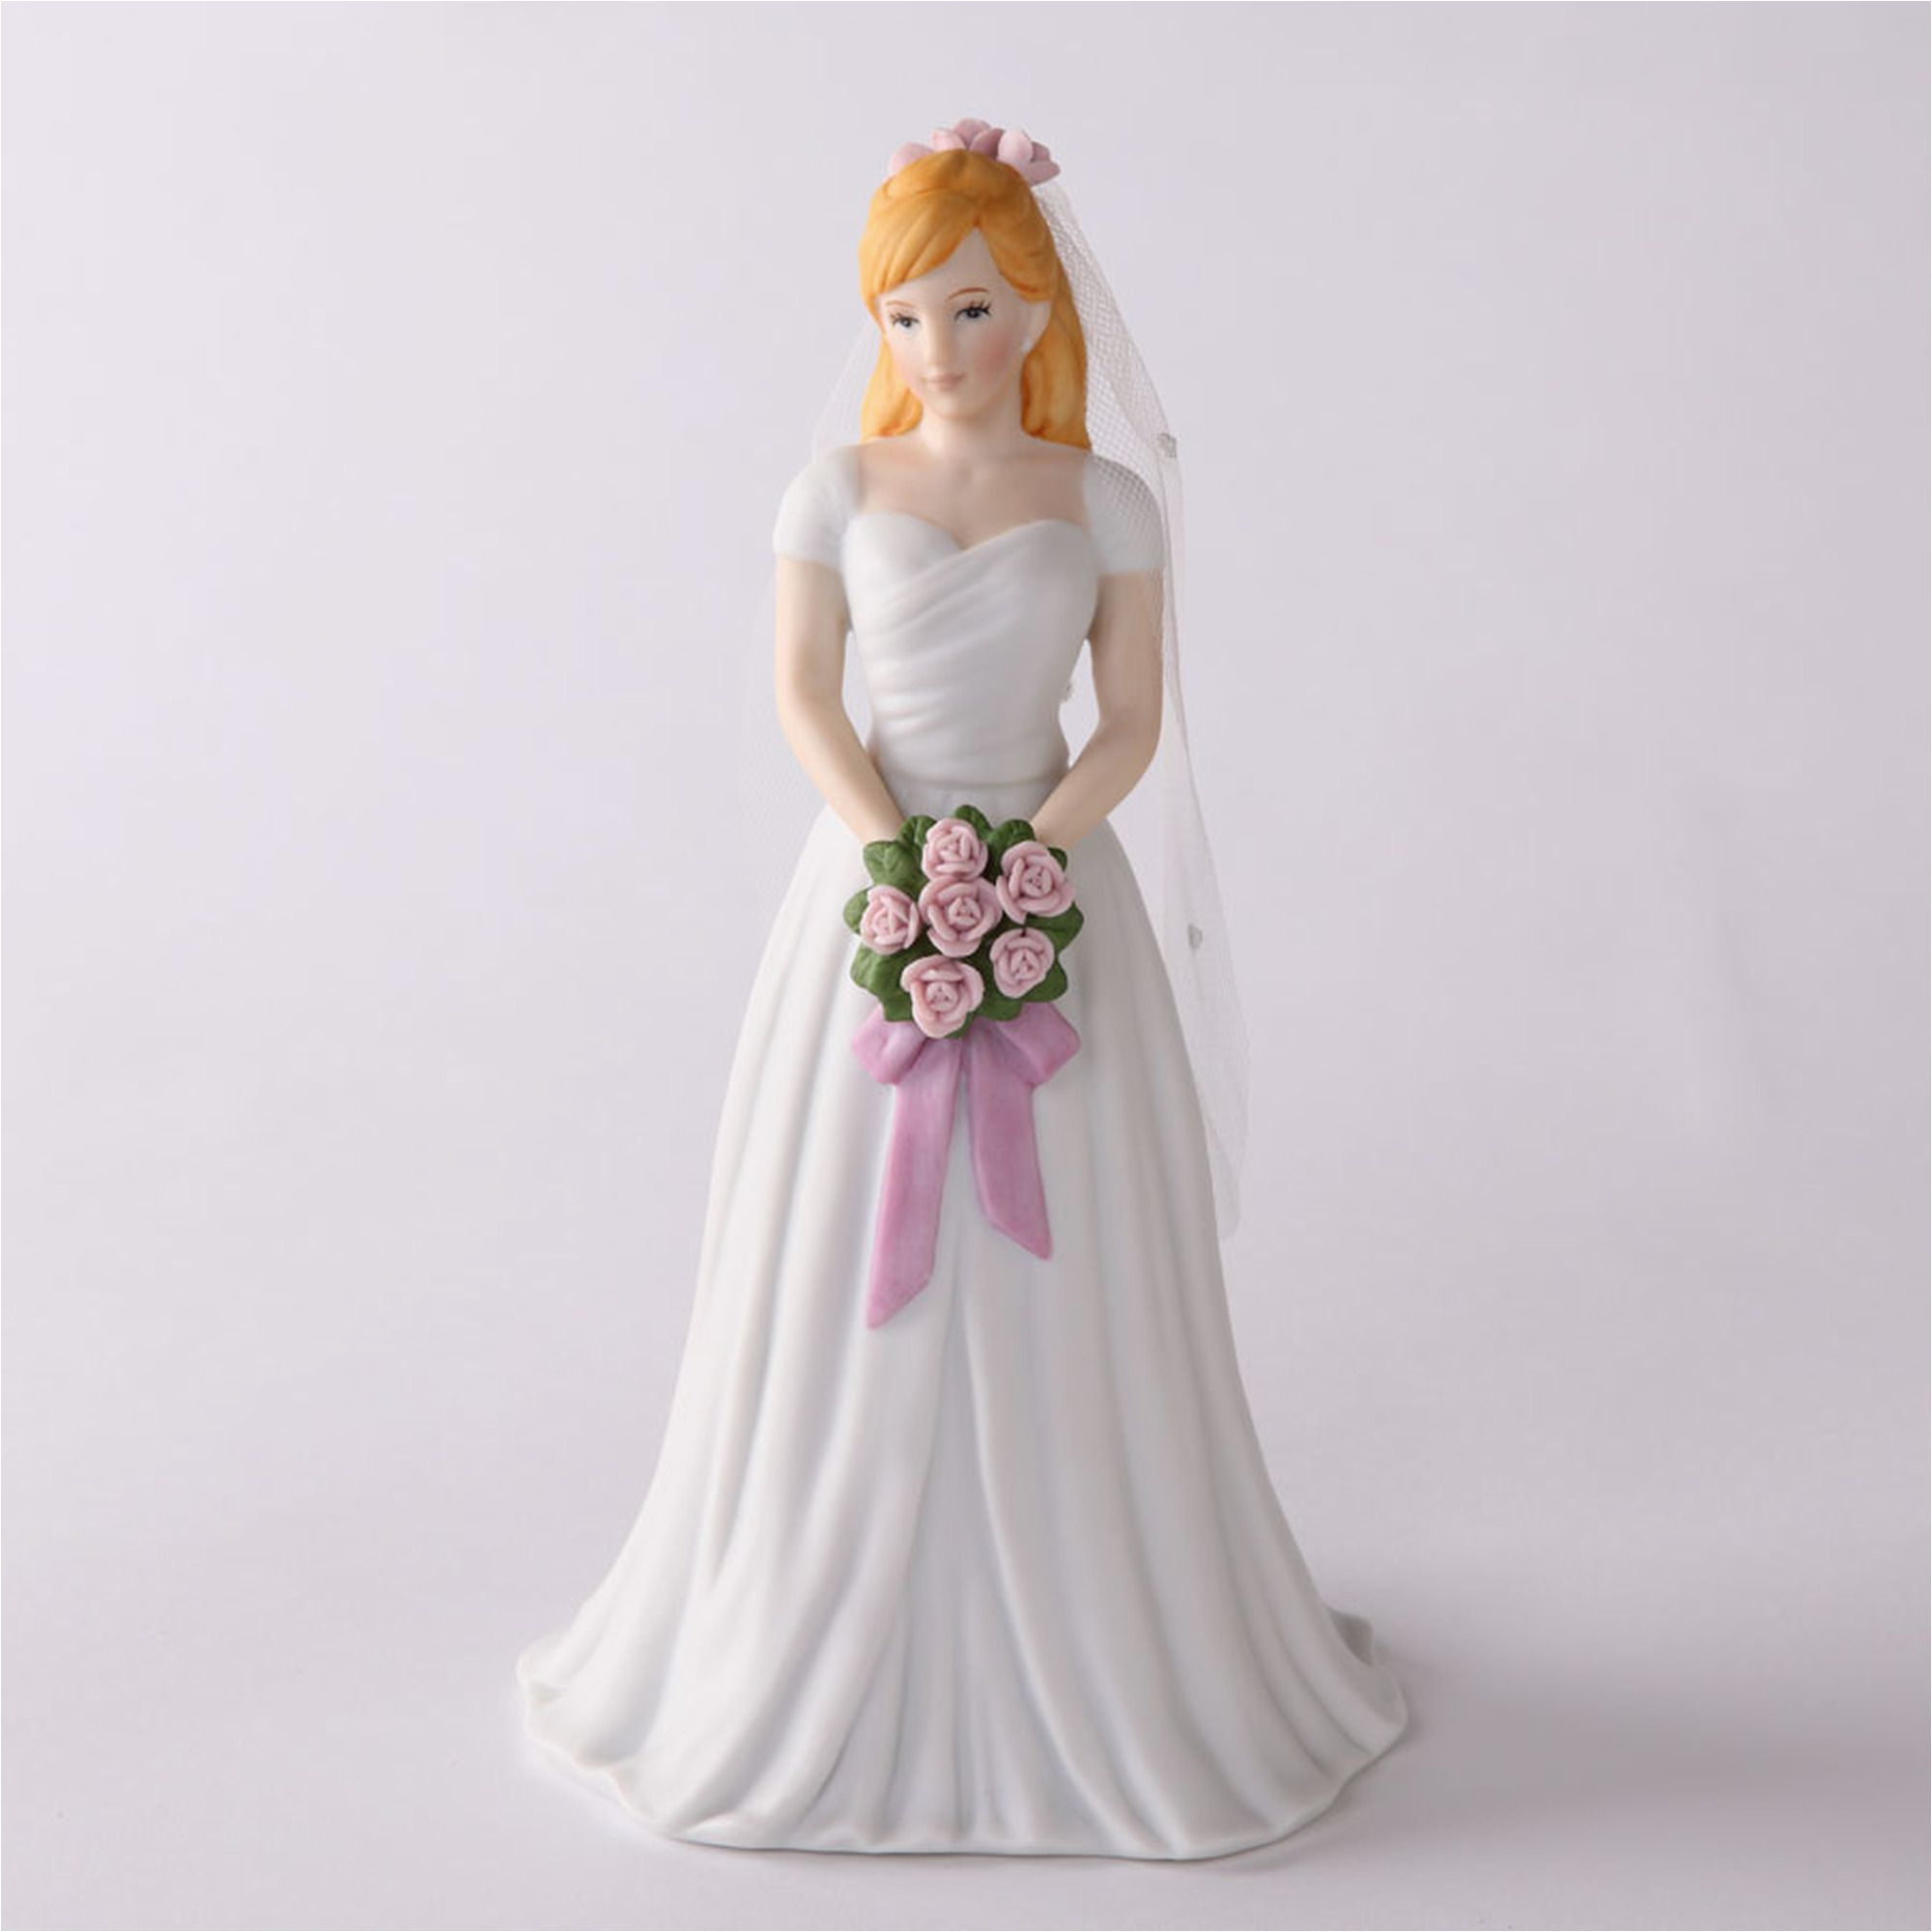 Growing Up Birthday Girls Bride Growing Up Girls Blonde Bride the Final and Crowing Piece